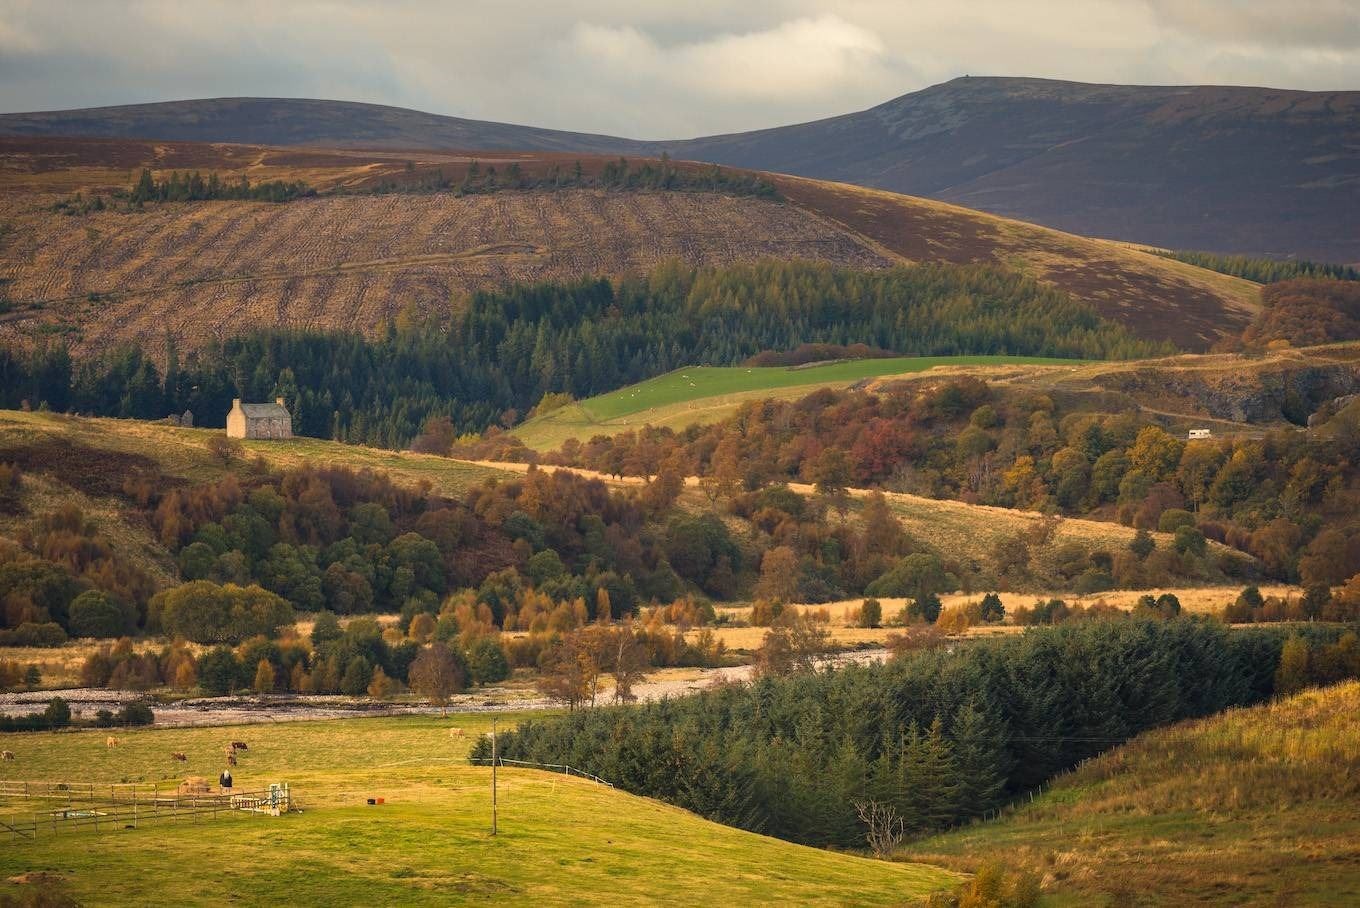 The Cairngorms National Park Authority has launched an online Community Paths and Trails Guide ahead of Wee Walks Week.